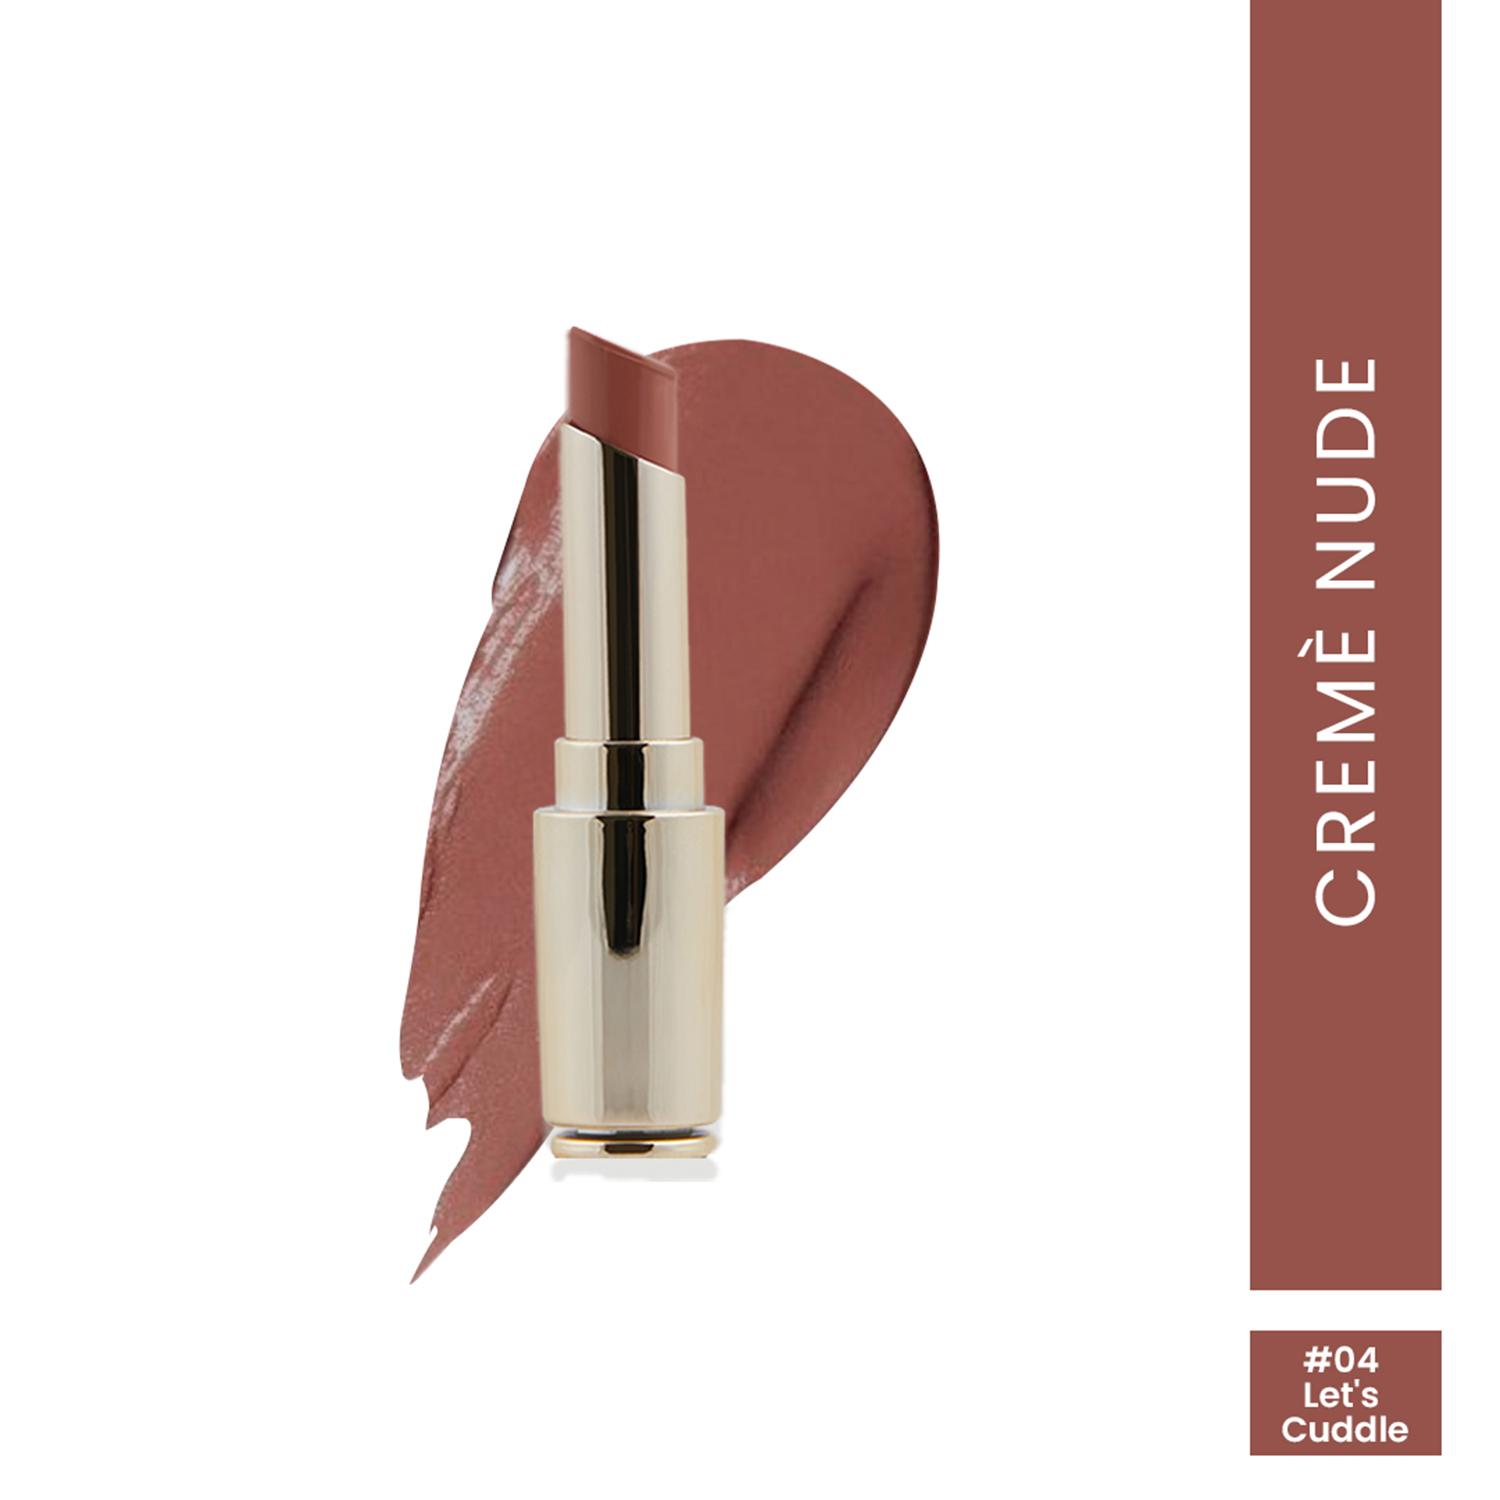 Charmacy Milano Flattering Nude Lipstick - 04 Lets Cuddle (3.8g)